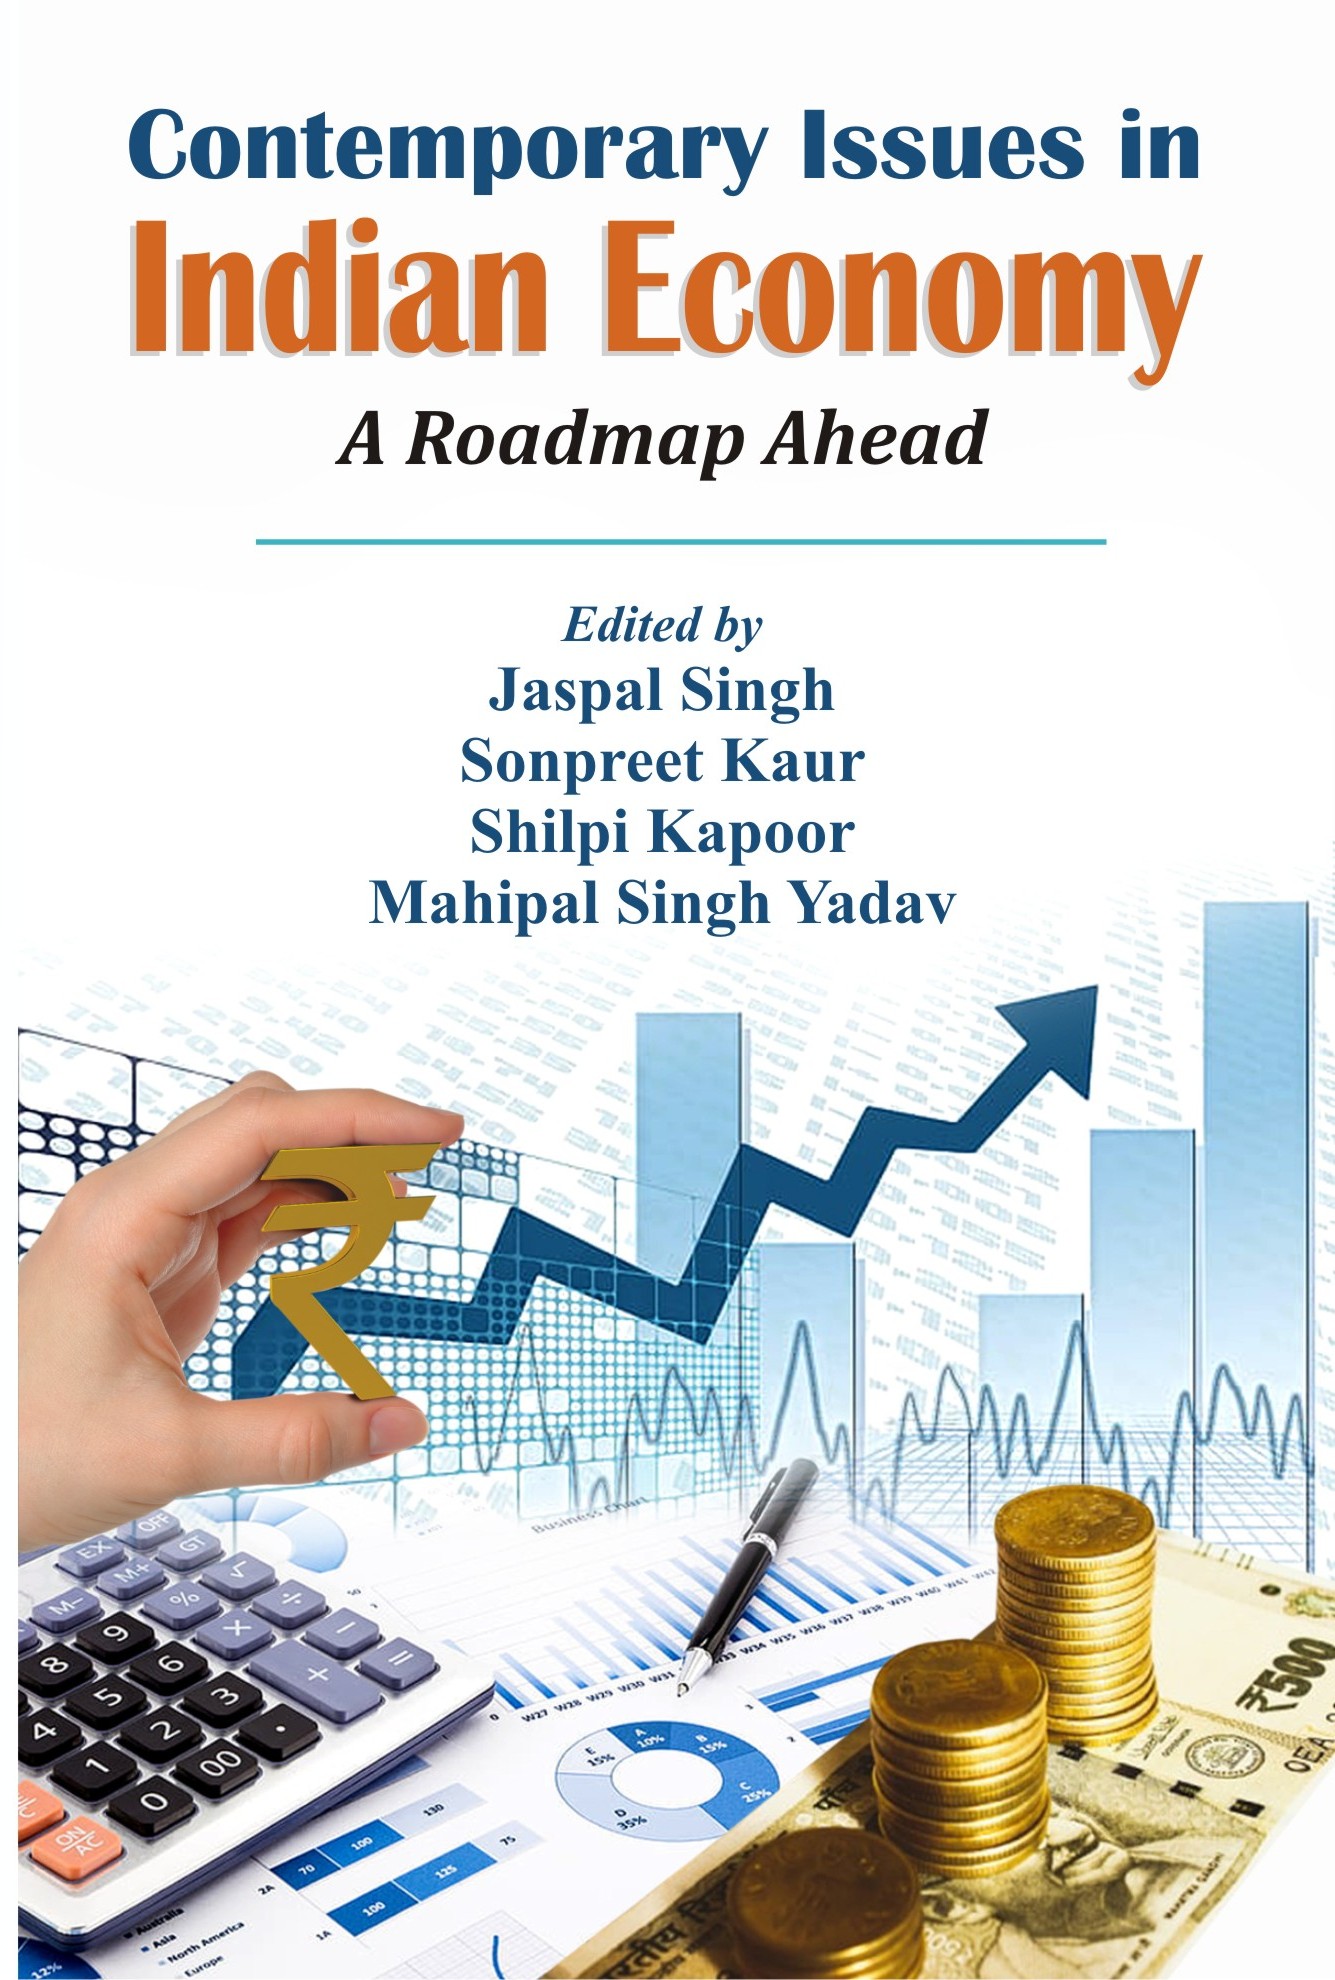 Contemporary Issues in Indian Economy A Roadmap Ahead by Jaspal Singh, Sonpreet Kaur, Shilpi